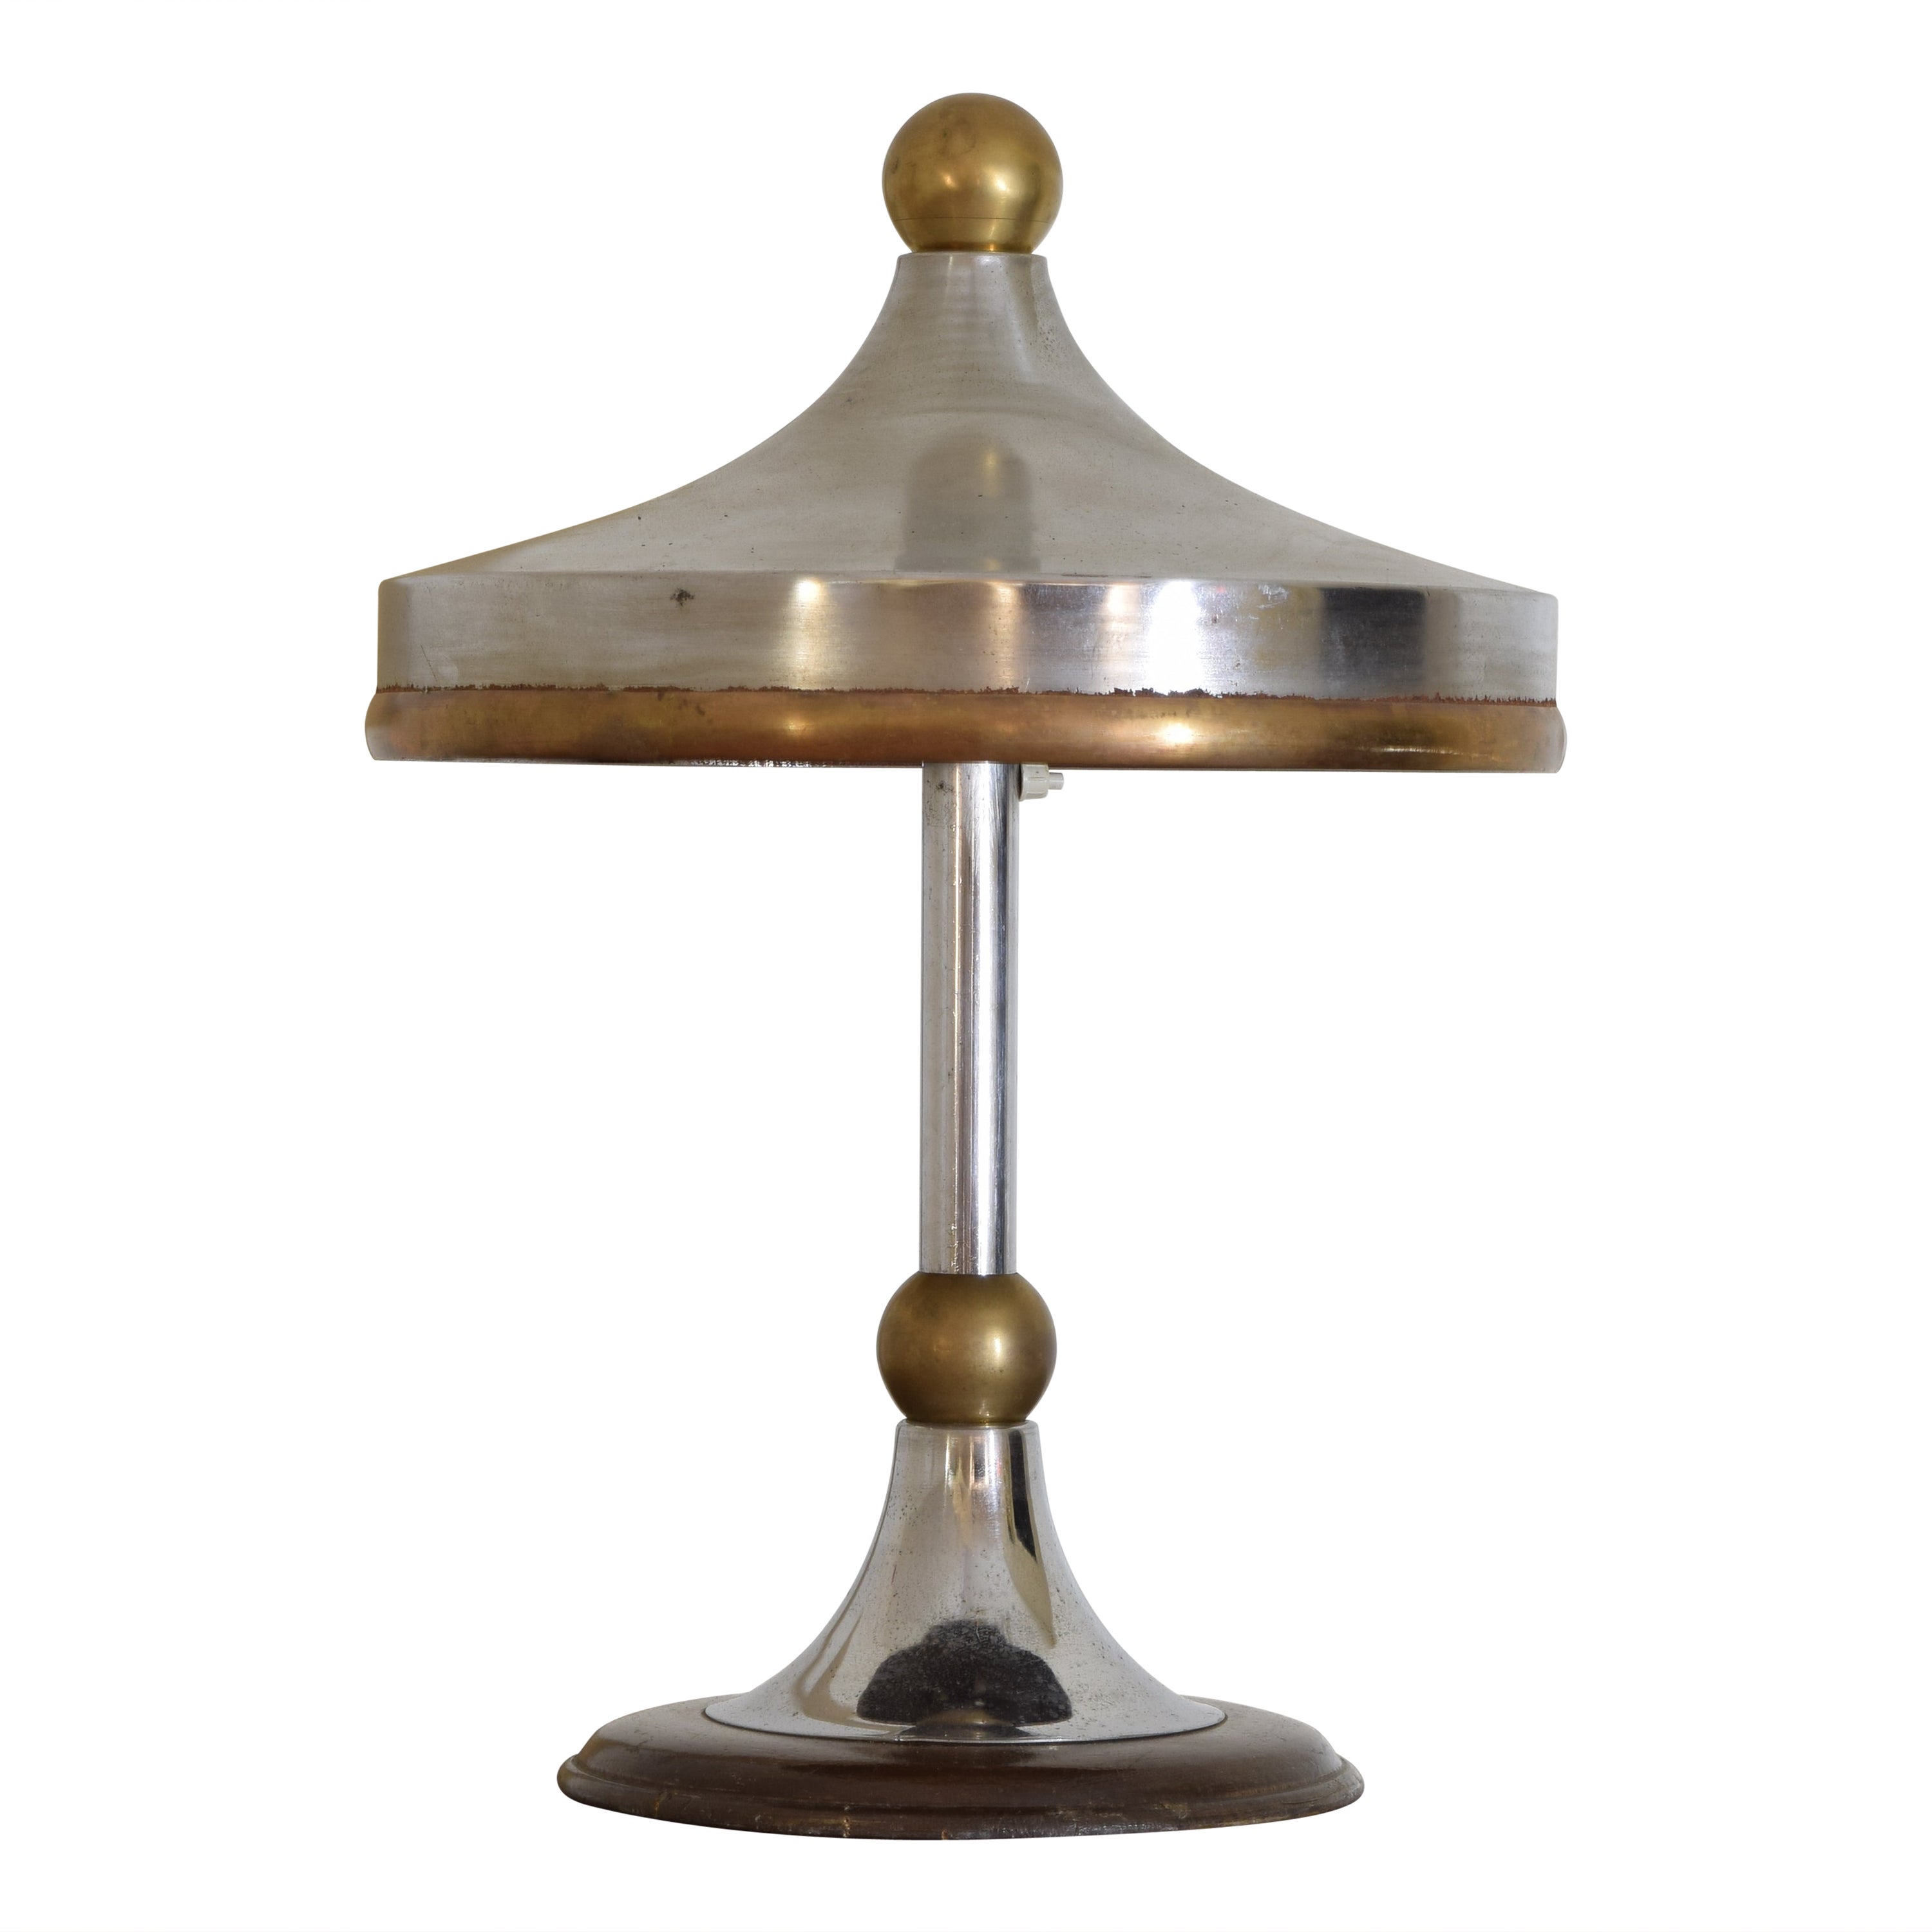 Italian Mid Century Modern Chrome and Brass Table Lamp, early 2nd half 20th cen. For Sale